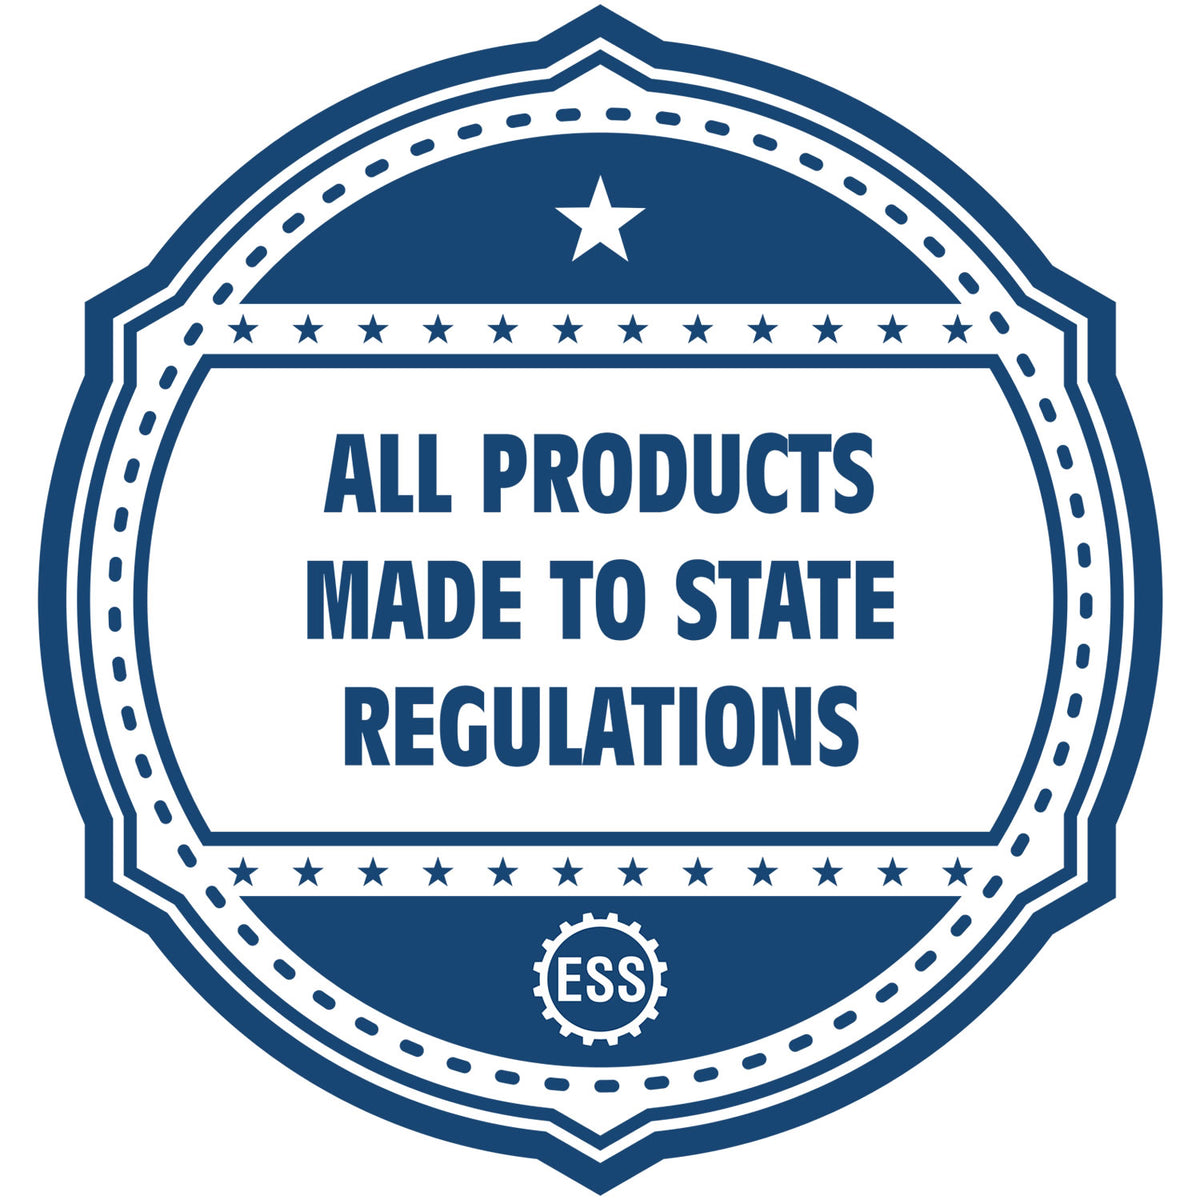 A blue icon or badge for the Heavy Duty Cast Iron North Carolina Geologist Seal Embosser showing that this product is made in compliance with state regulations.